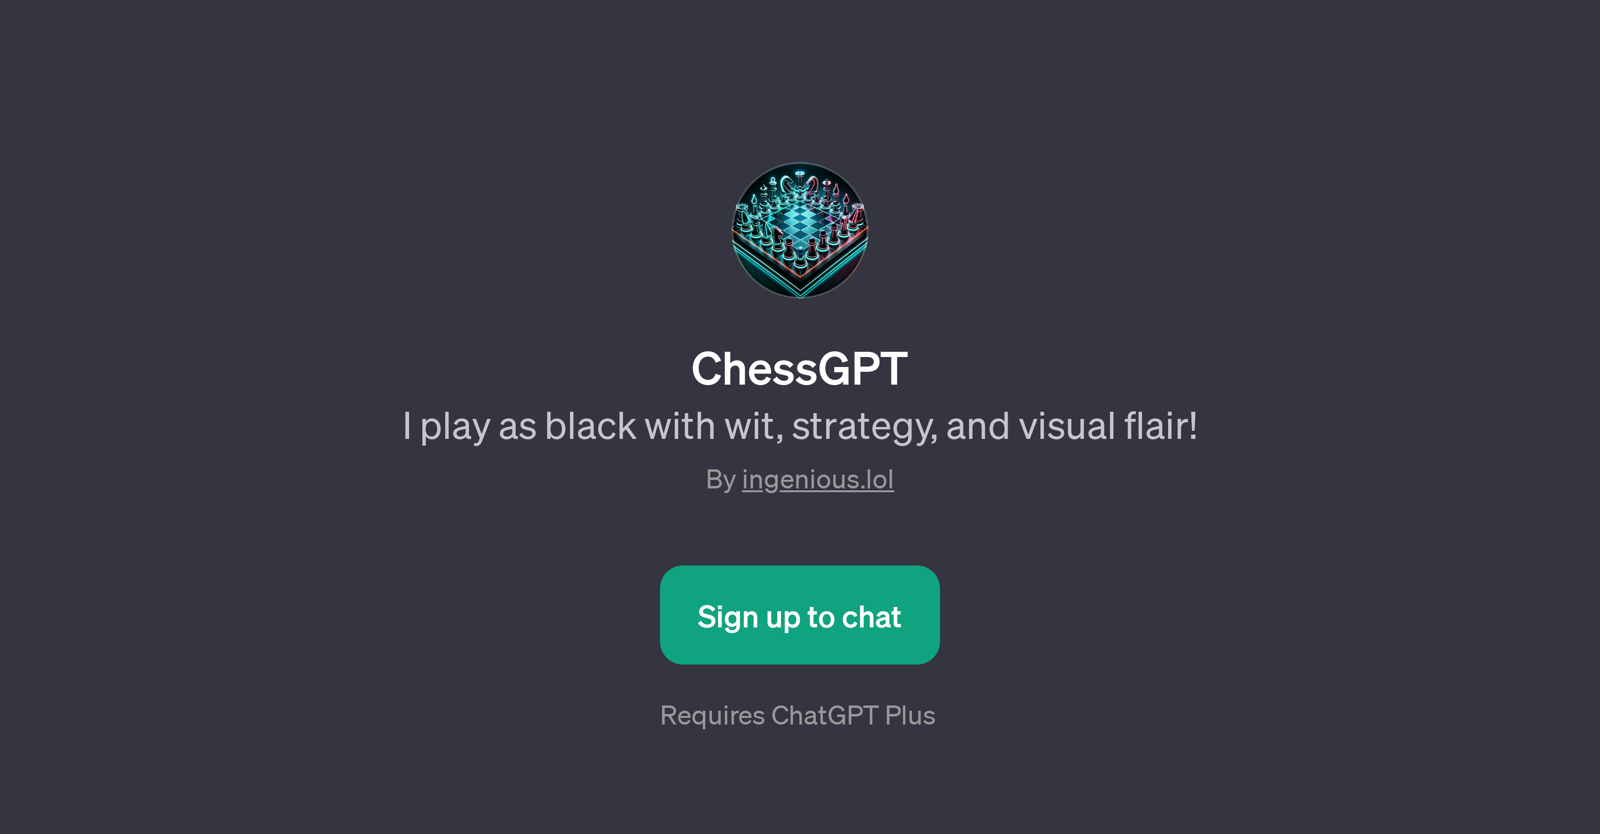 ChessGPT - Features, Pricing, Pros & Cons